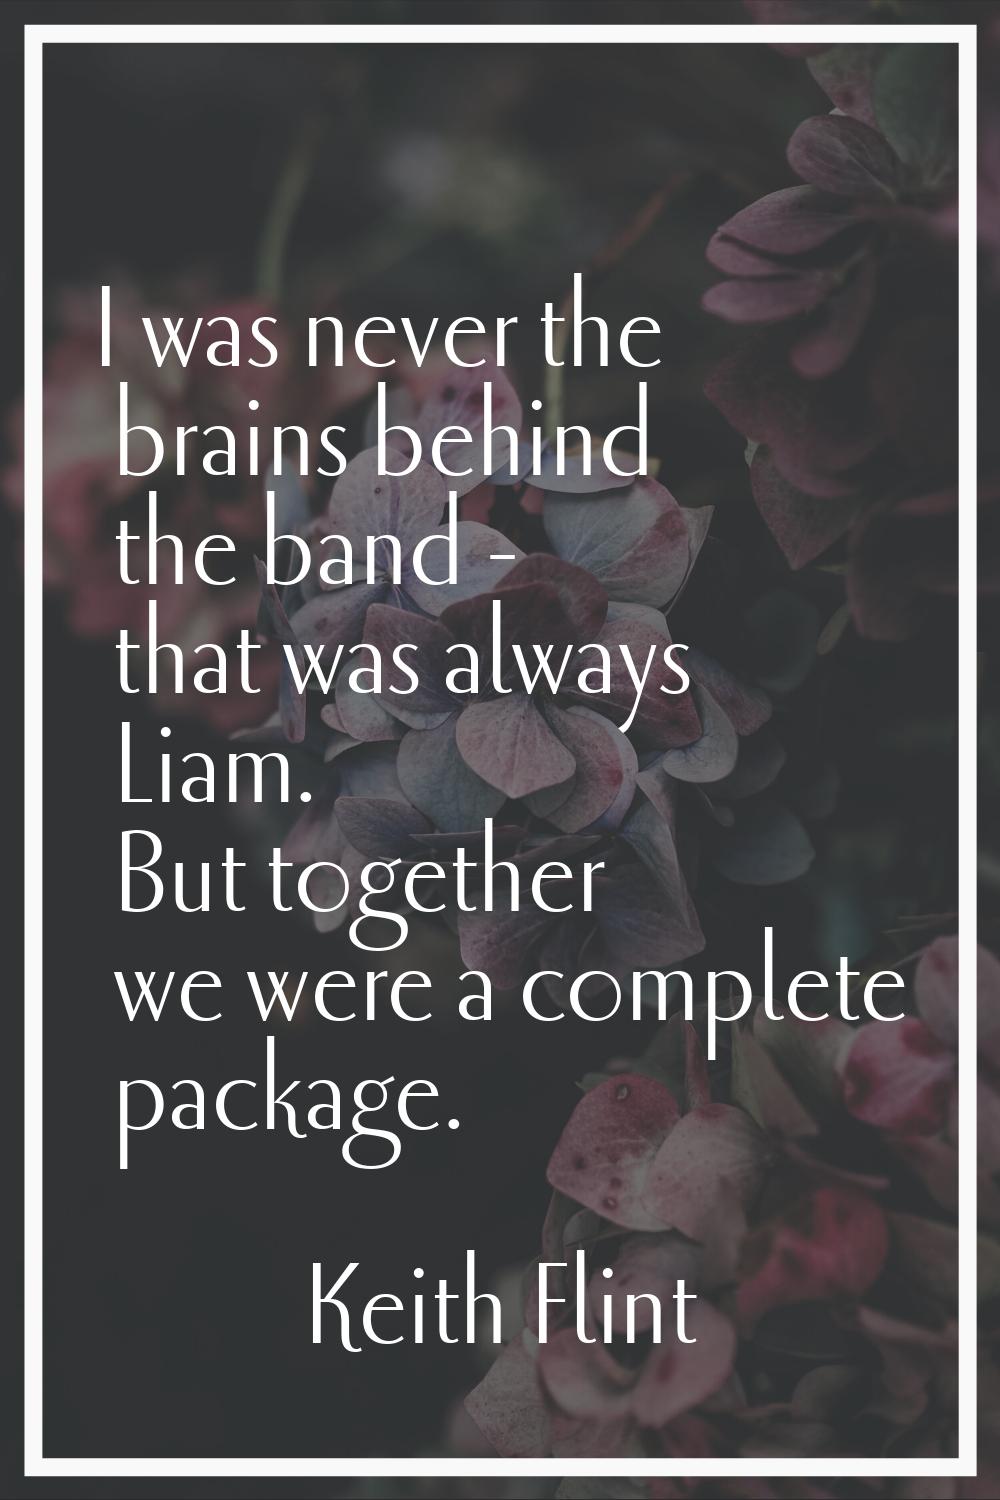 I was never the brains behind the band - that was always Liam. But together we were a complete pack